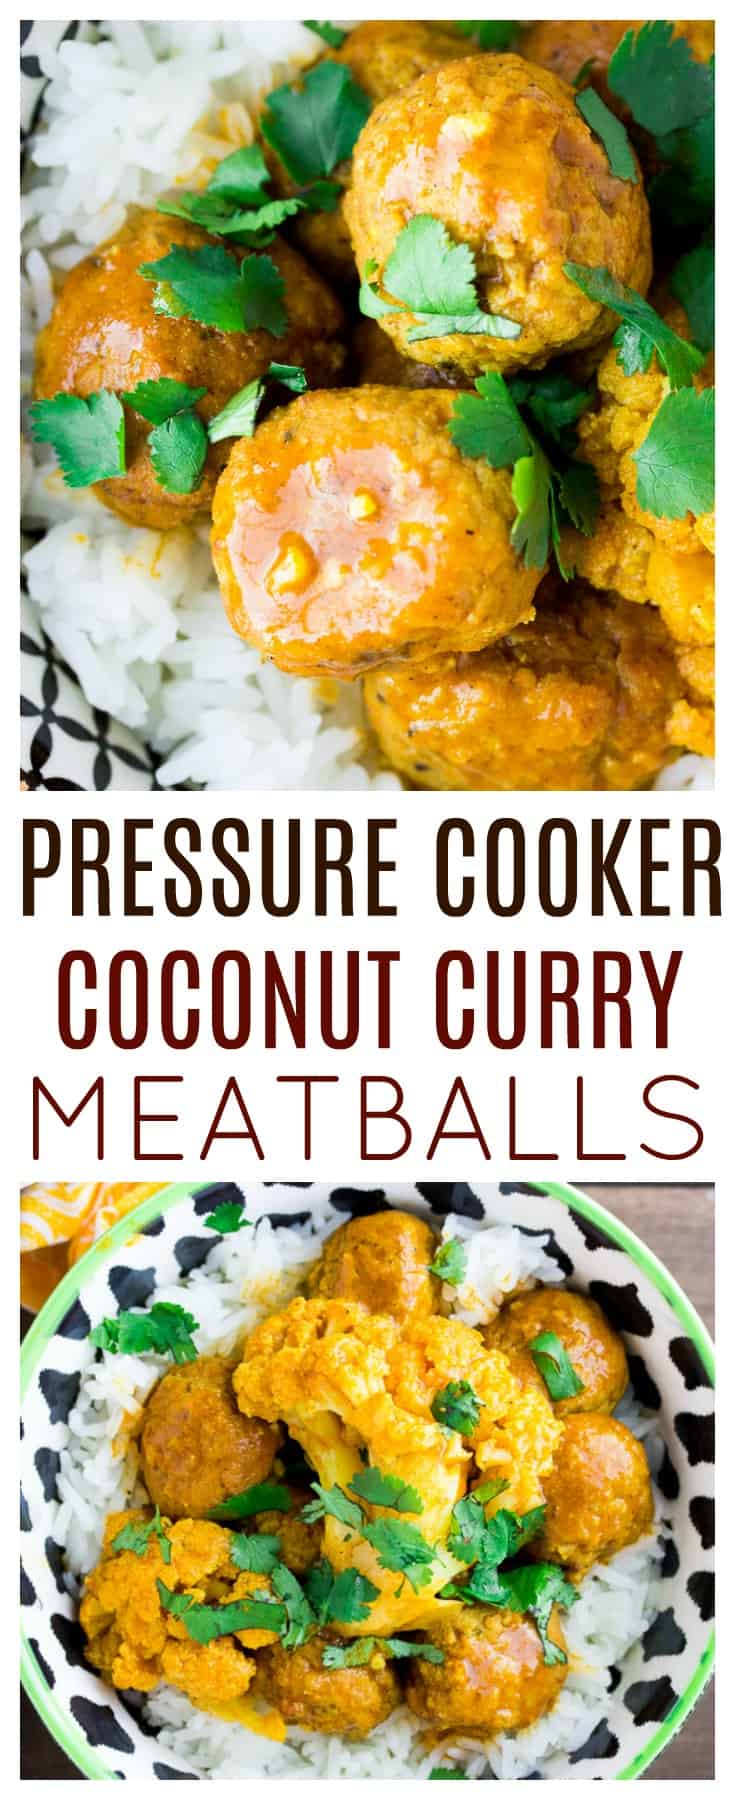 This Instant Pot Coconut Curry Meatballs & Cauliflower recipe is a quick, easy, and super flavorful main dish! It can be made in less than 30 minutes using your pressure cooker and Farm Rich Homestyle Meatballs! | #ad #dlbrecipes #curry #meatballs #farmrich